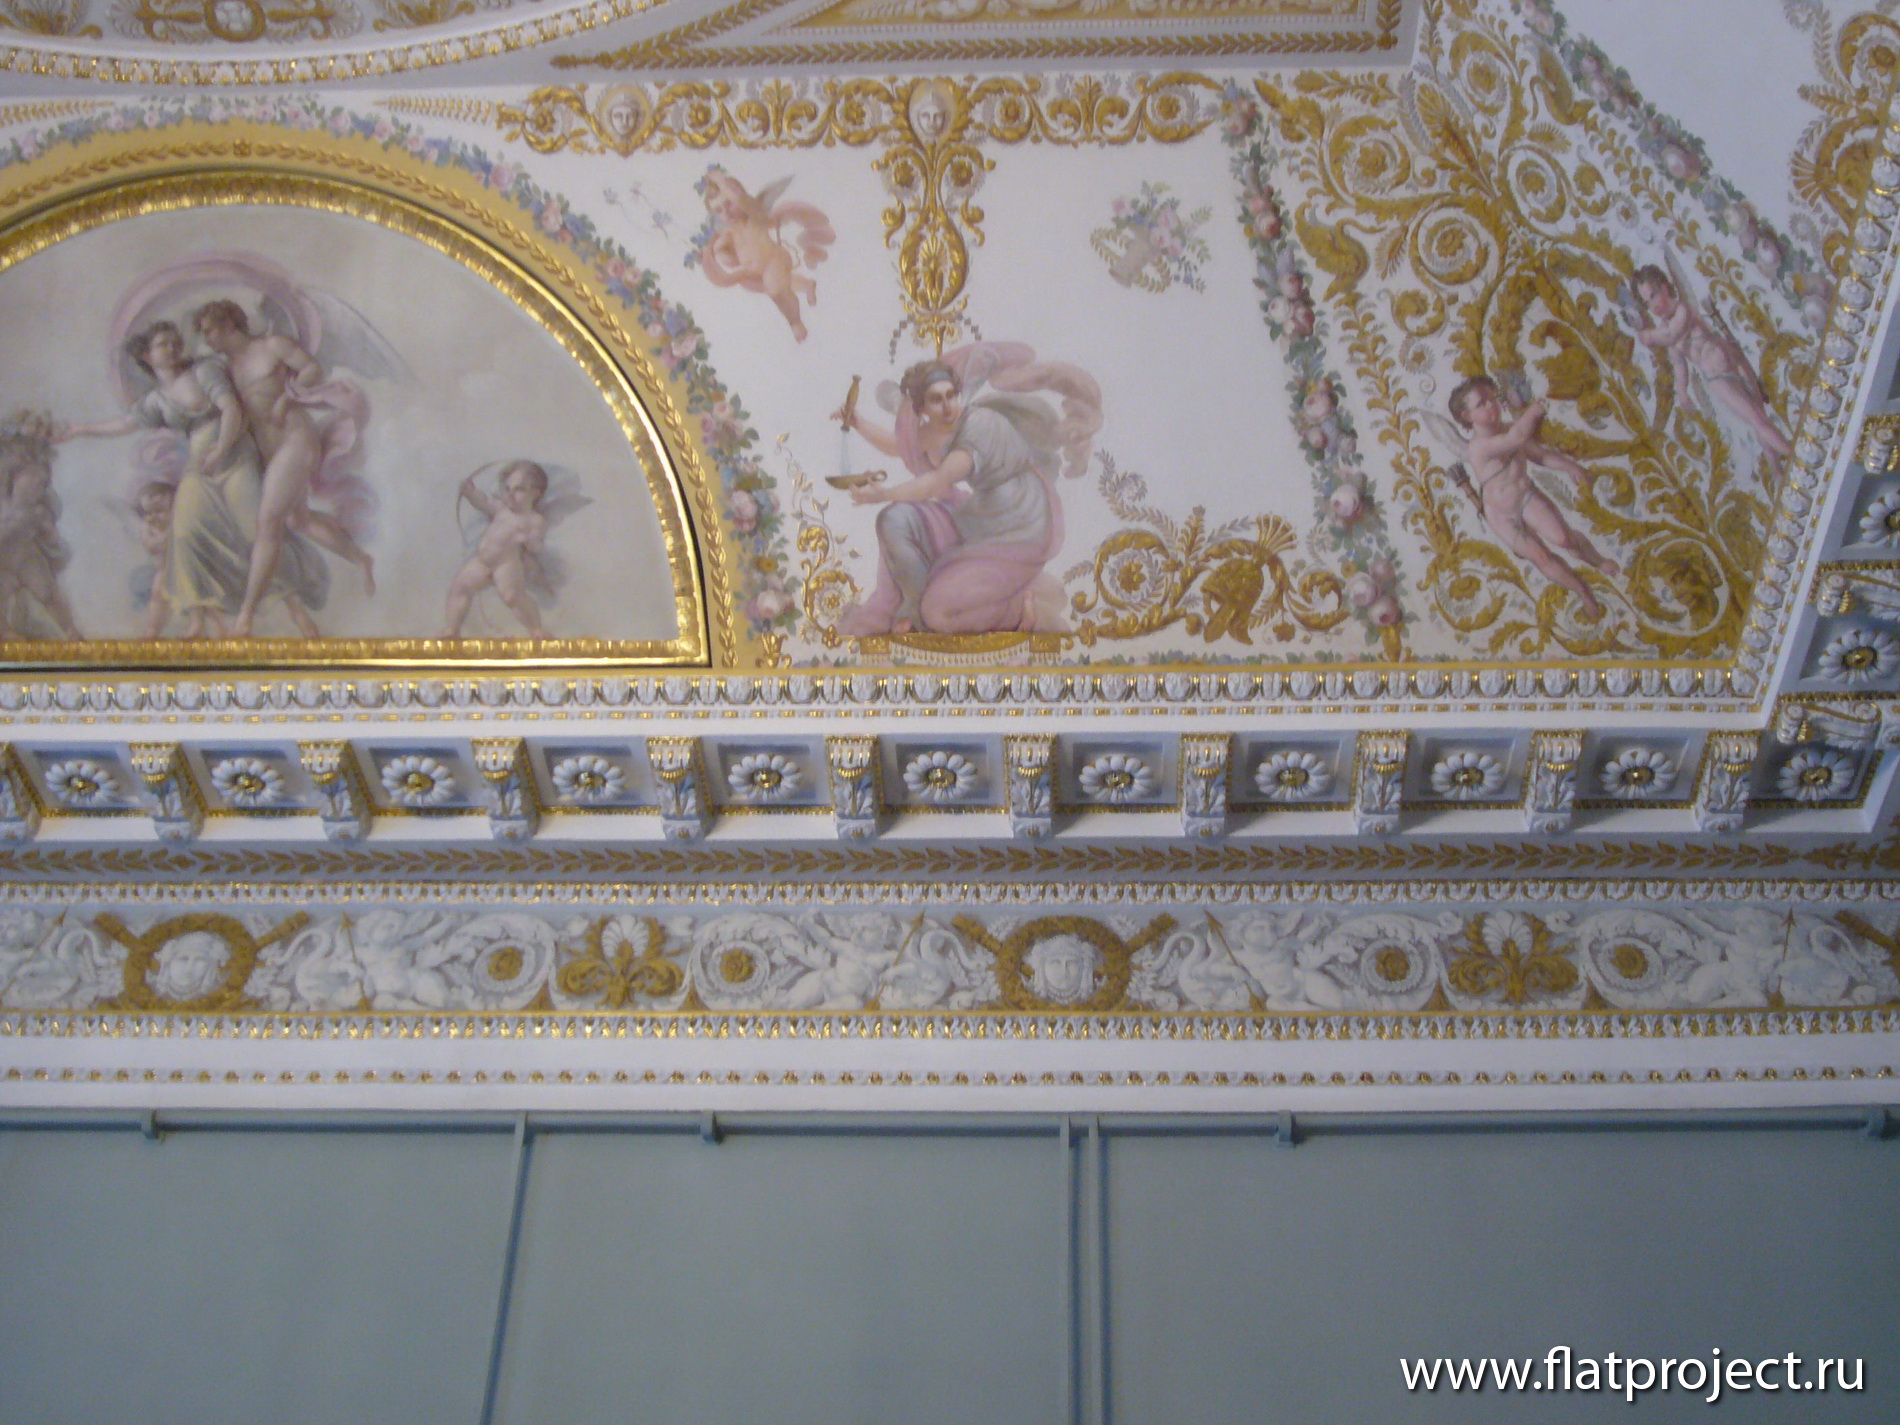 The State Russian museum interiors – photo 51